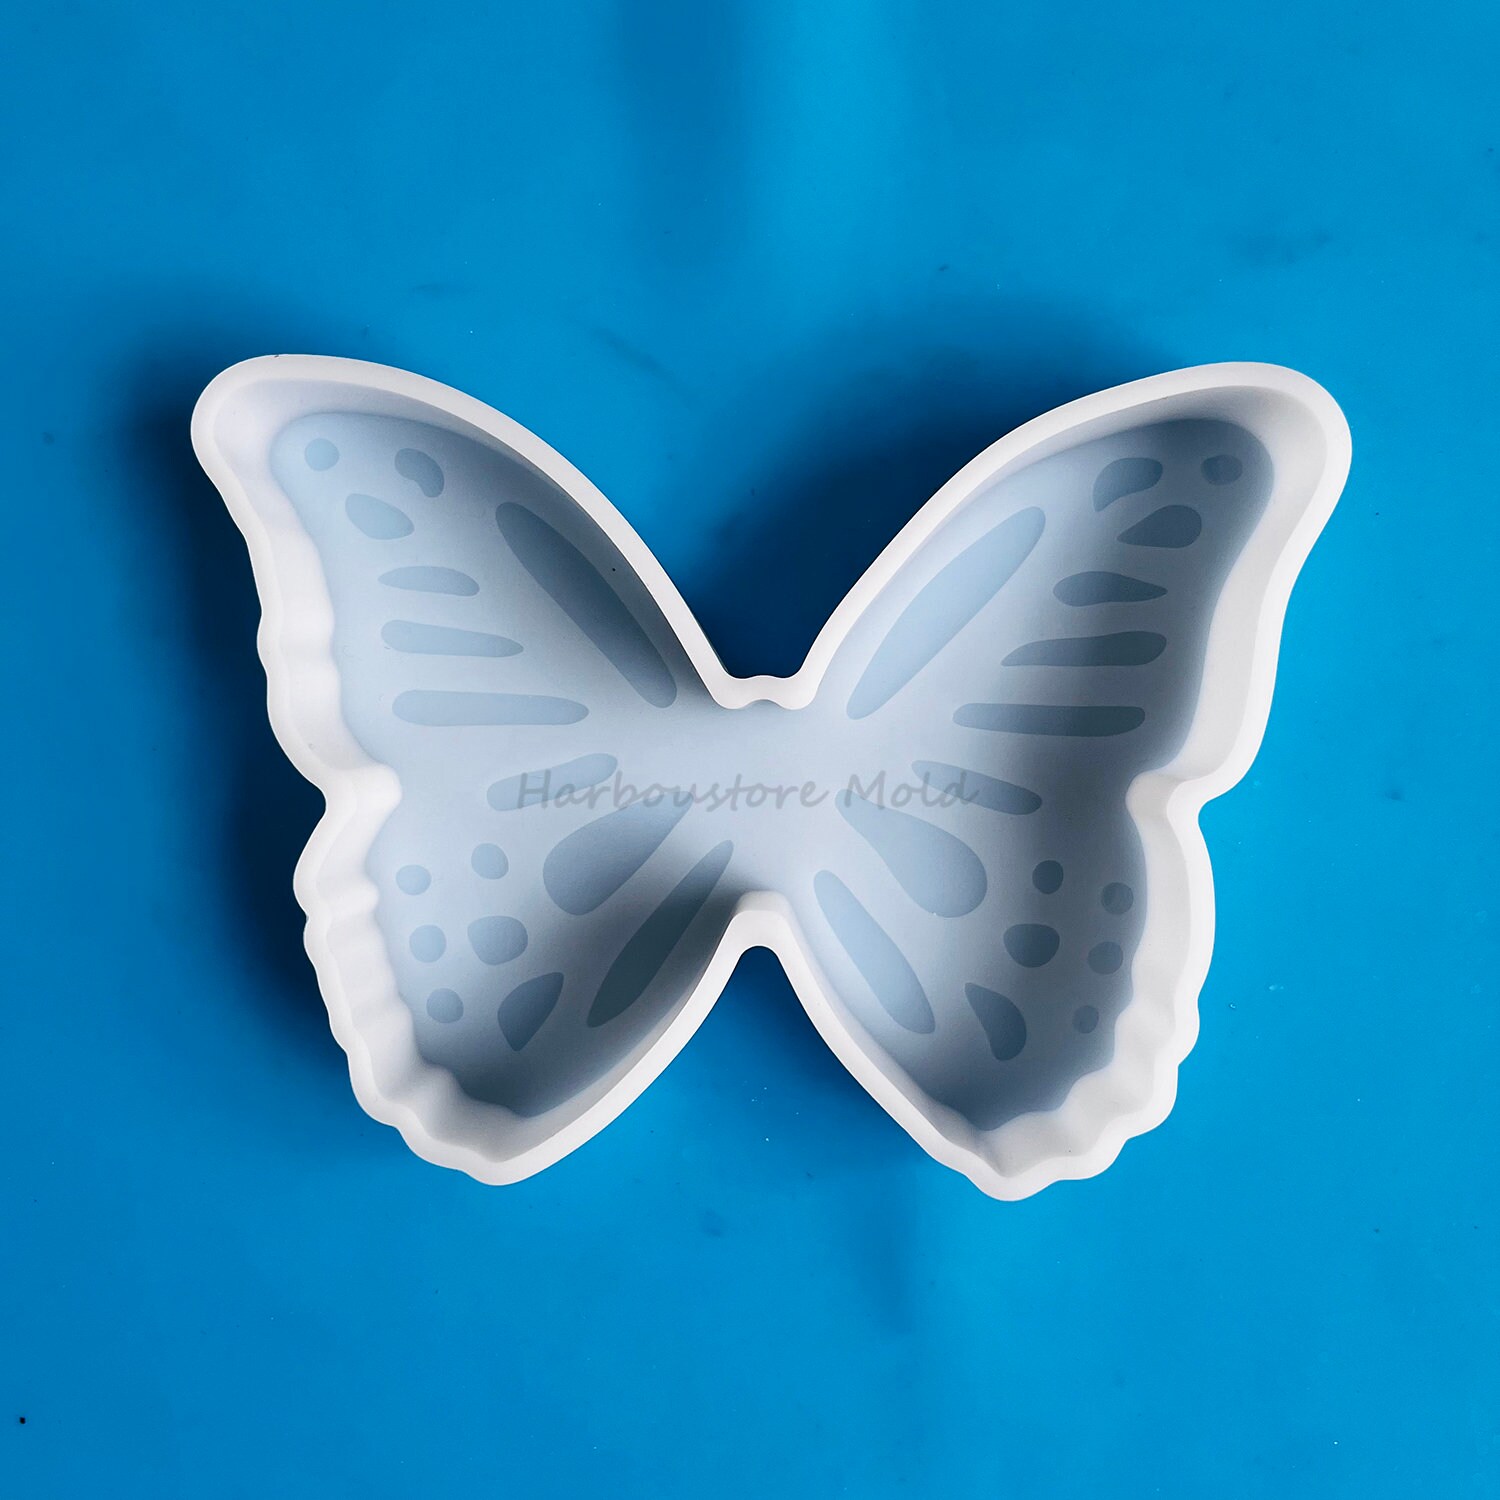 Butterfly Silicone Cookie Mold – Artesão Cookie Molds